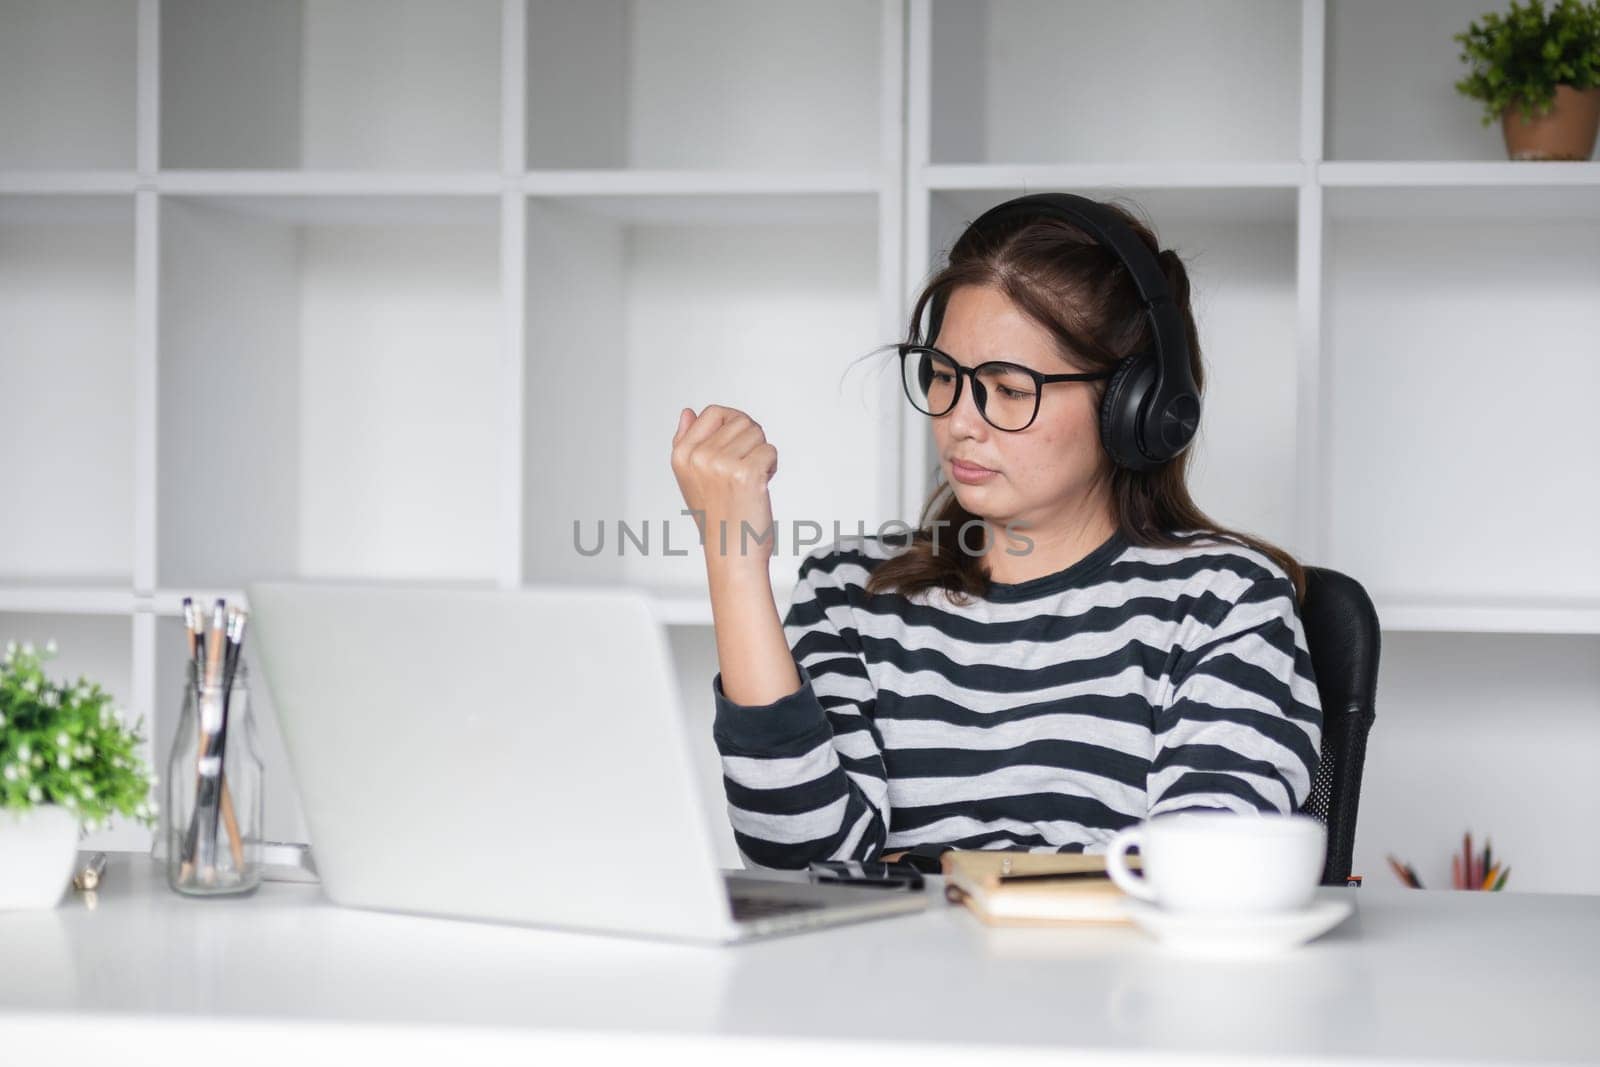 A young woman who is bored from studying online at home wears headphones while studying in an online class..